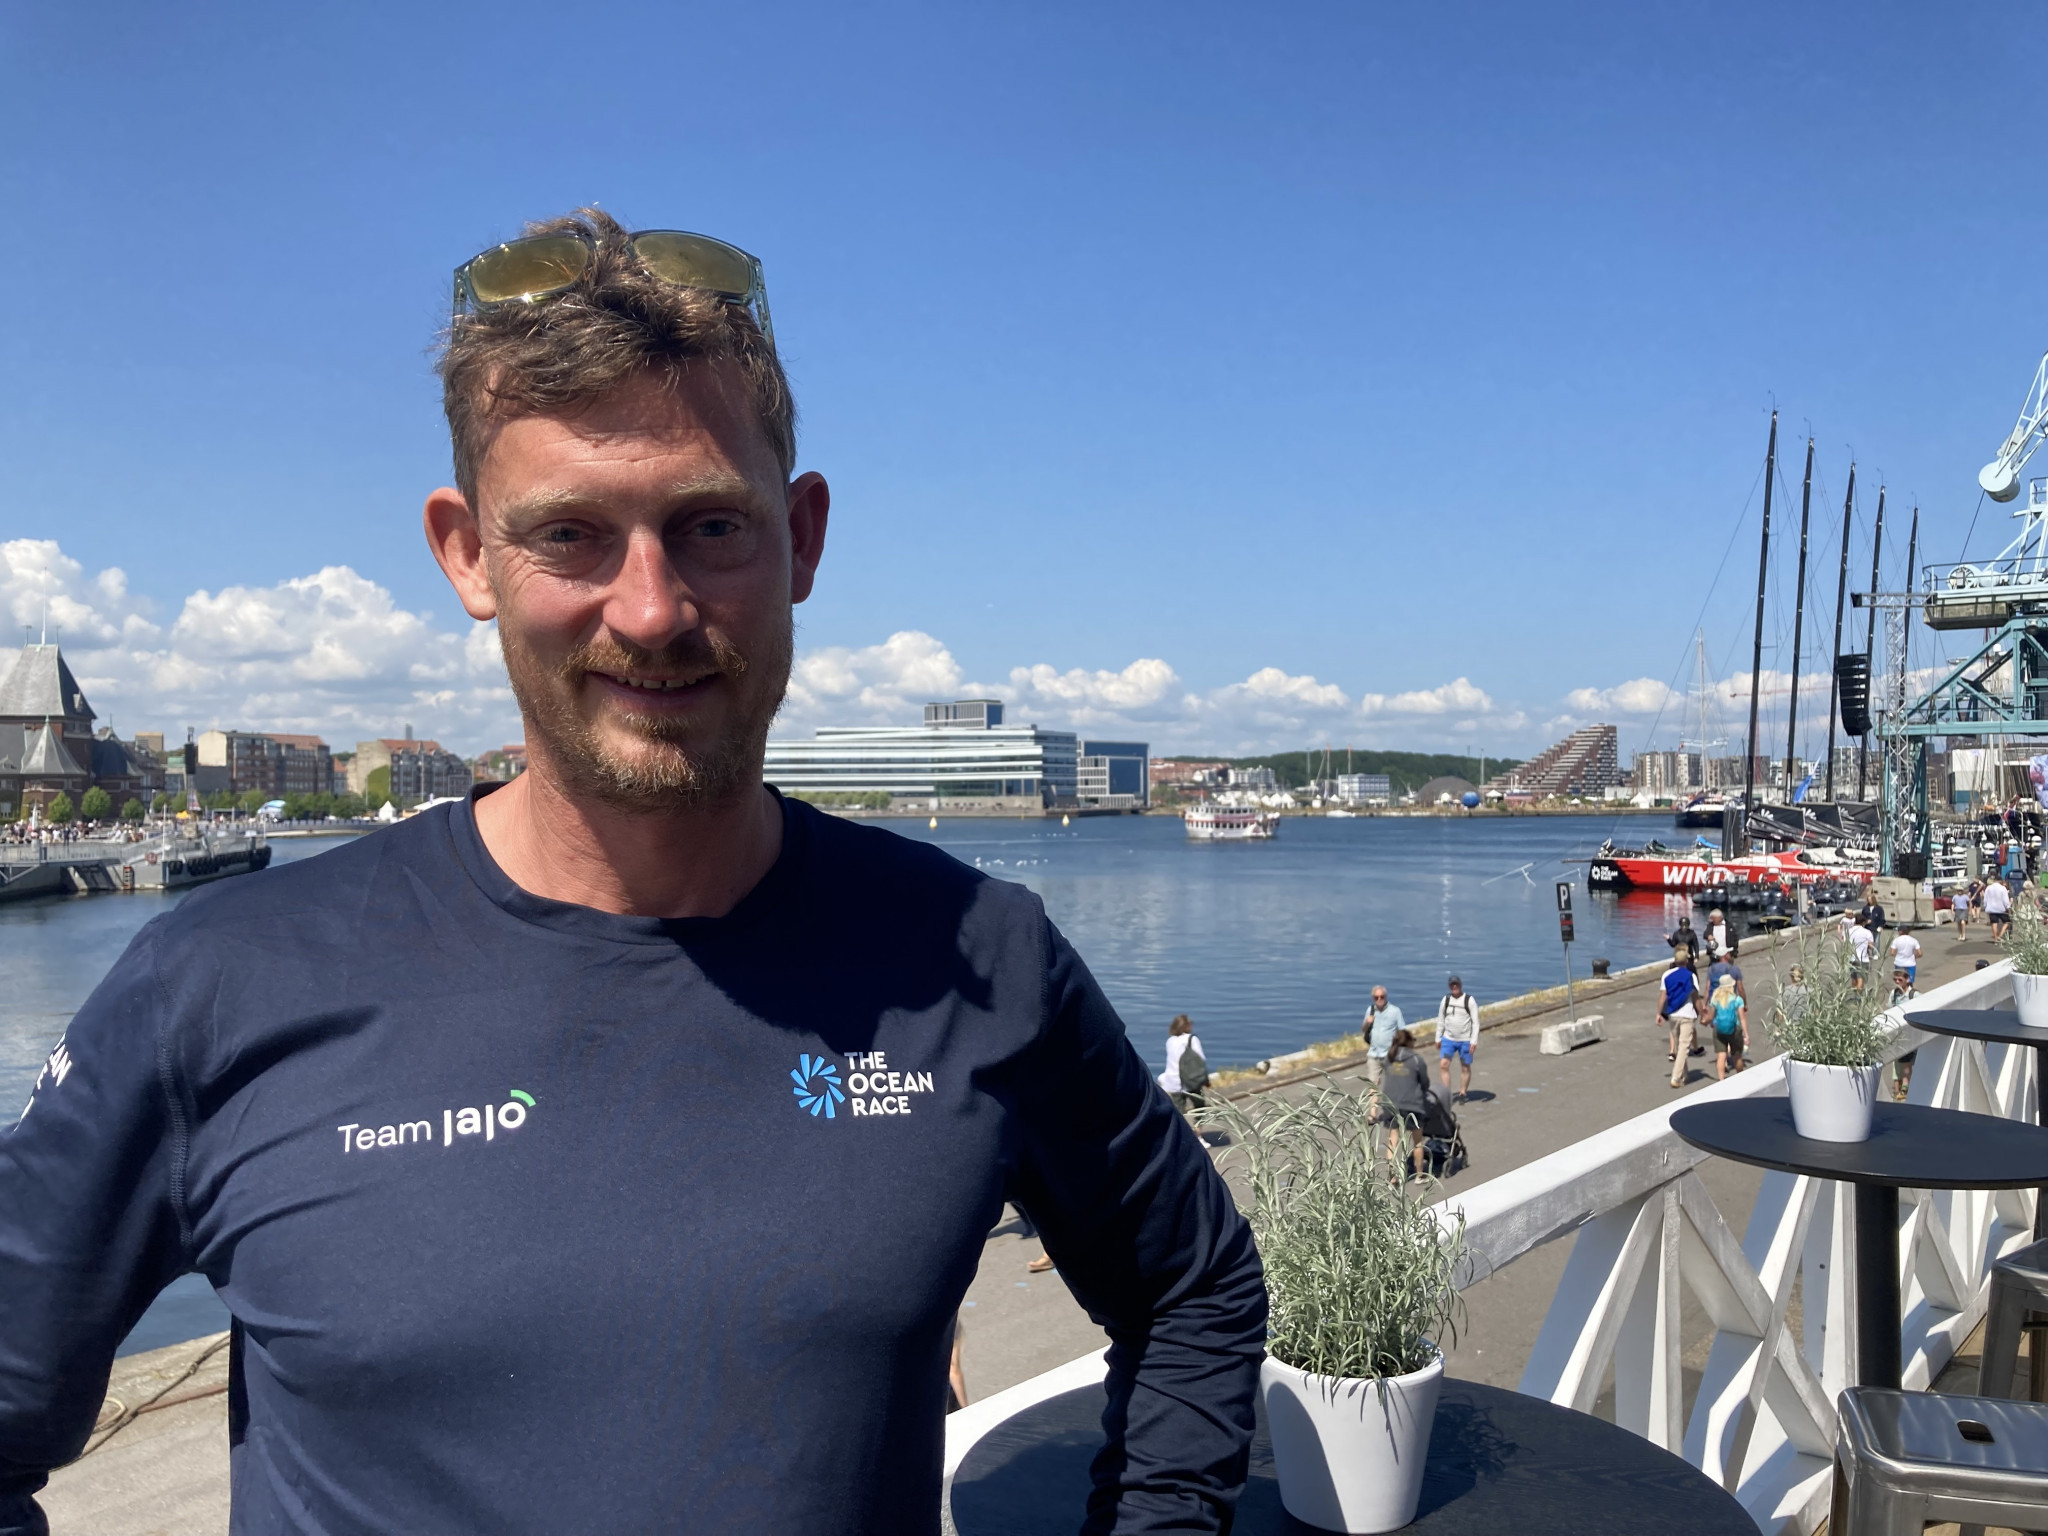 Danish Olympic gold medallist Martin Kirketerp is competing in The Ocean Race which has stopped in his home city of Aarhus ©ITG